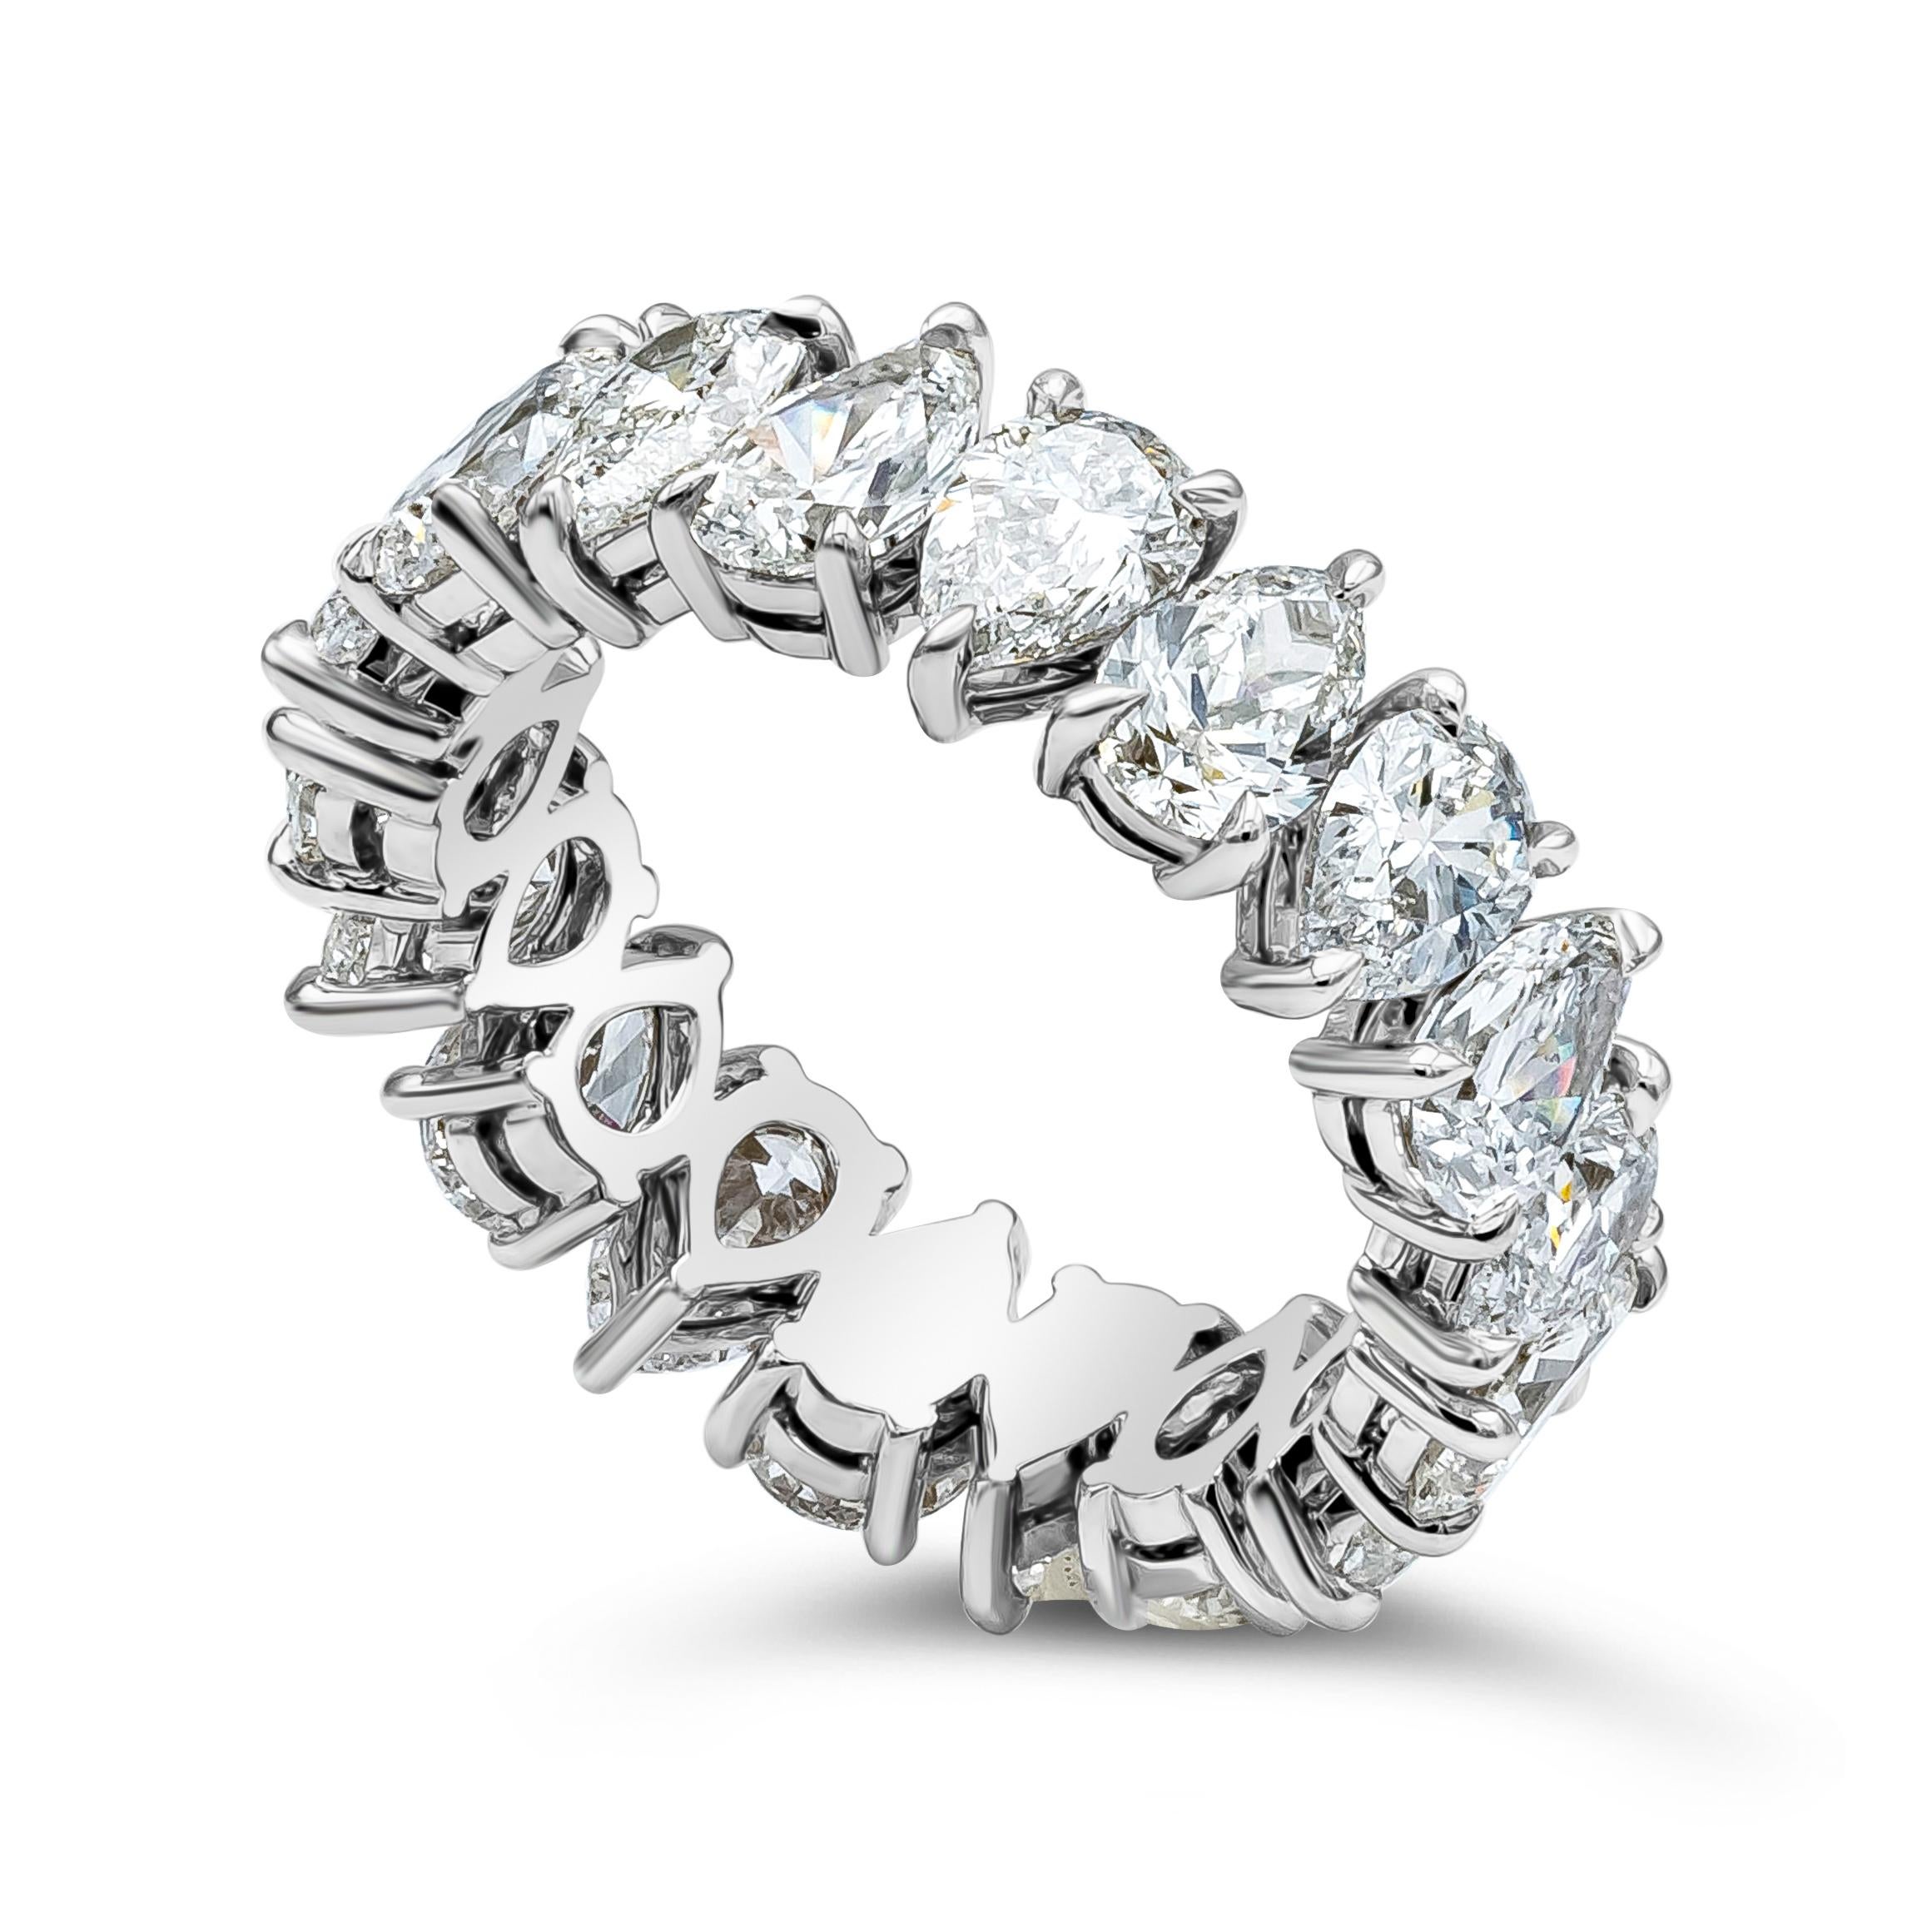 A brilliant and unique eternity band style featuring 18 brilliant pear shape diamonds weighing 5.52 carats total. E-F in Color and VS-SI in Clarity. Made with Platinum. Size 6 US

Style available in different price ranges. Prices are based on your